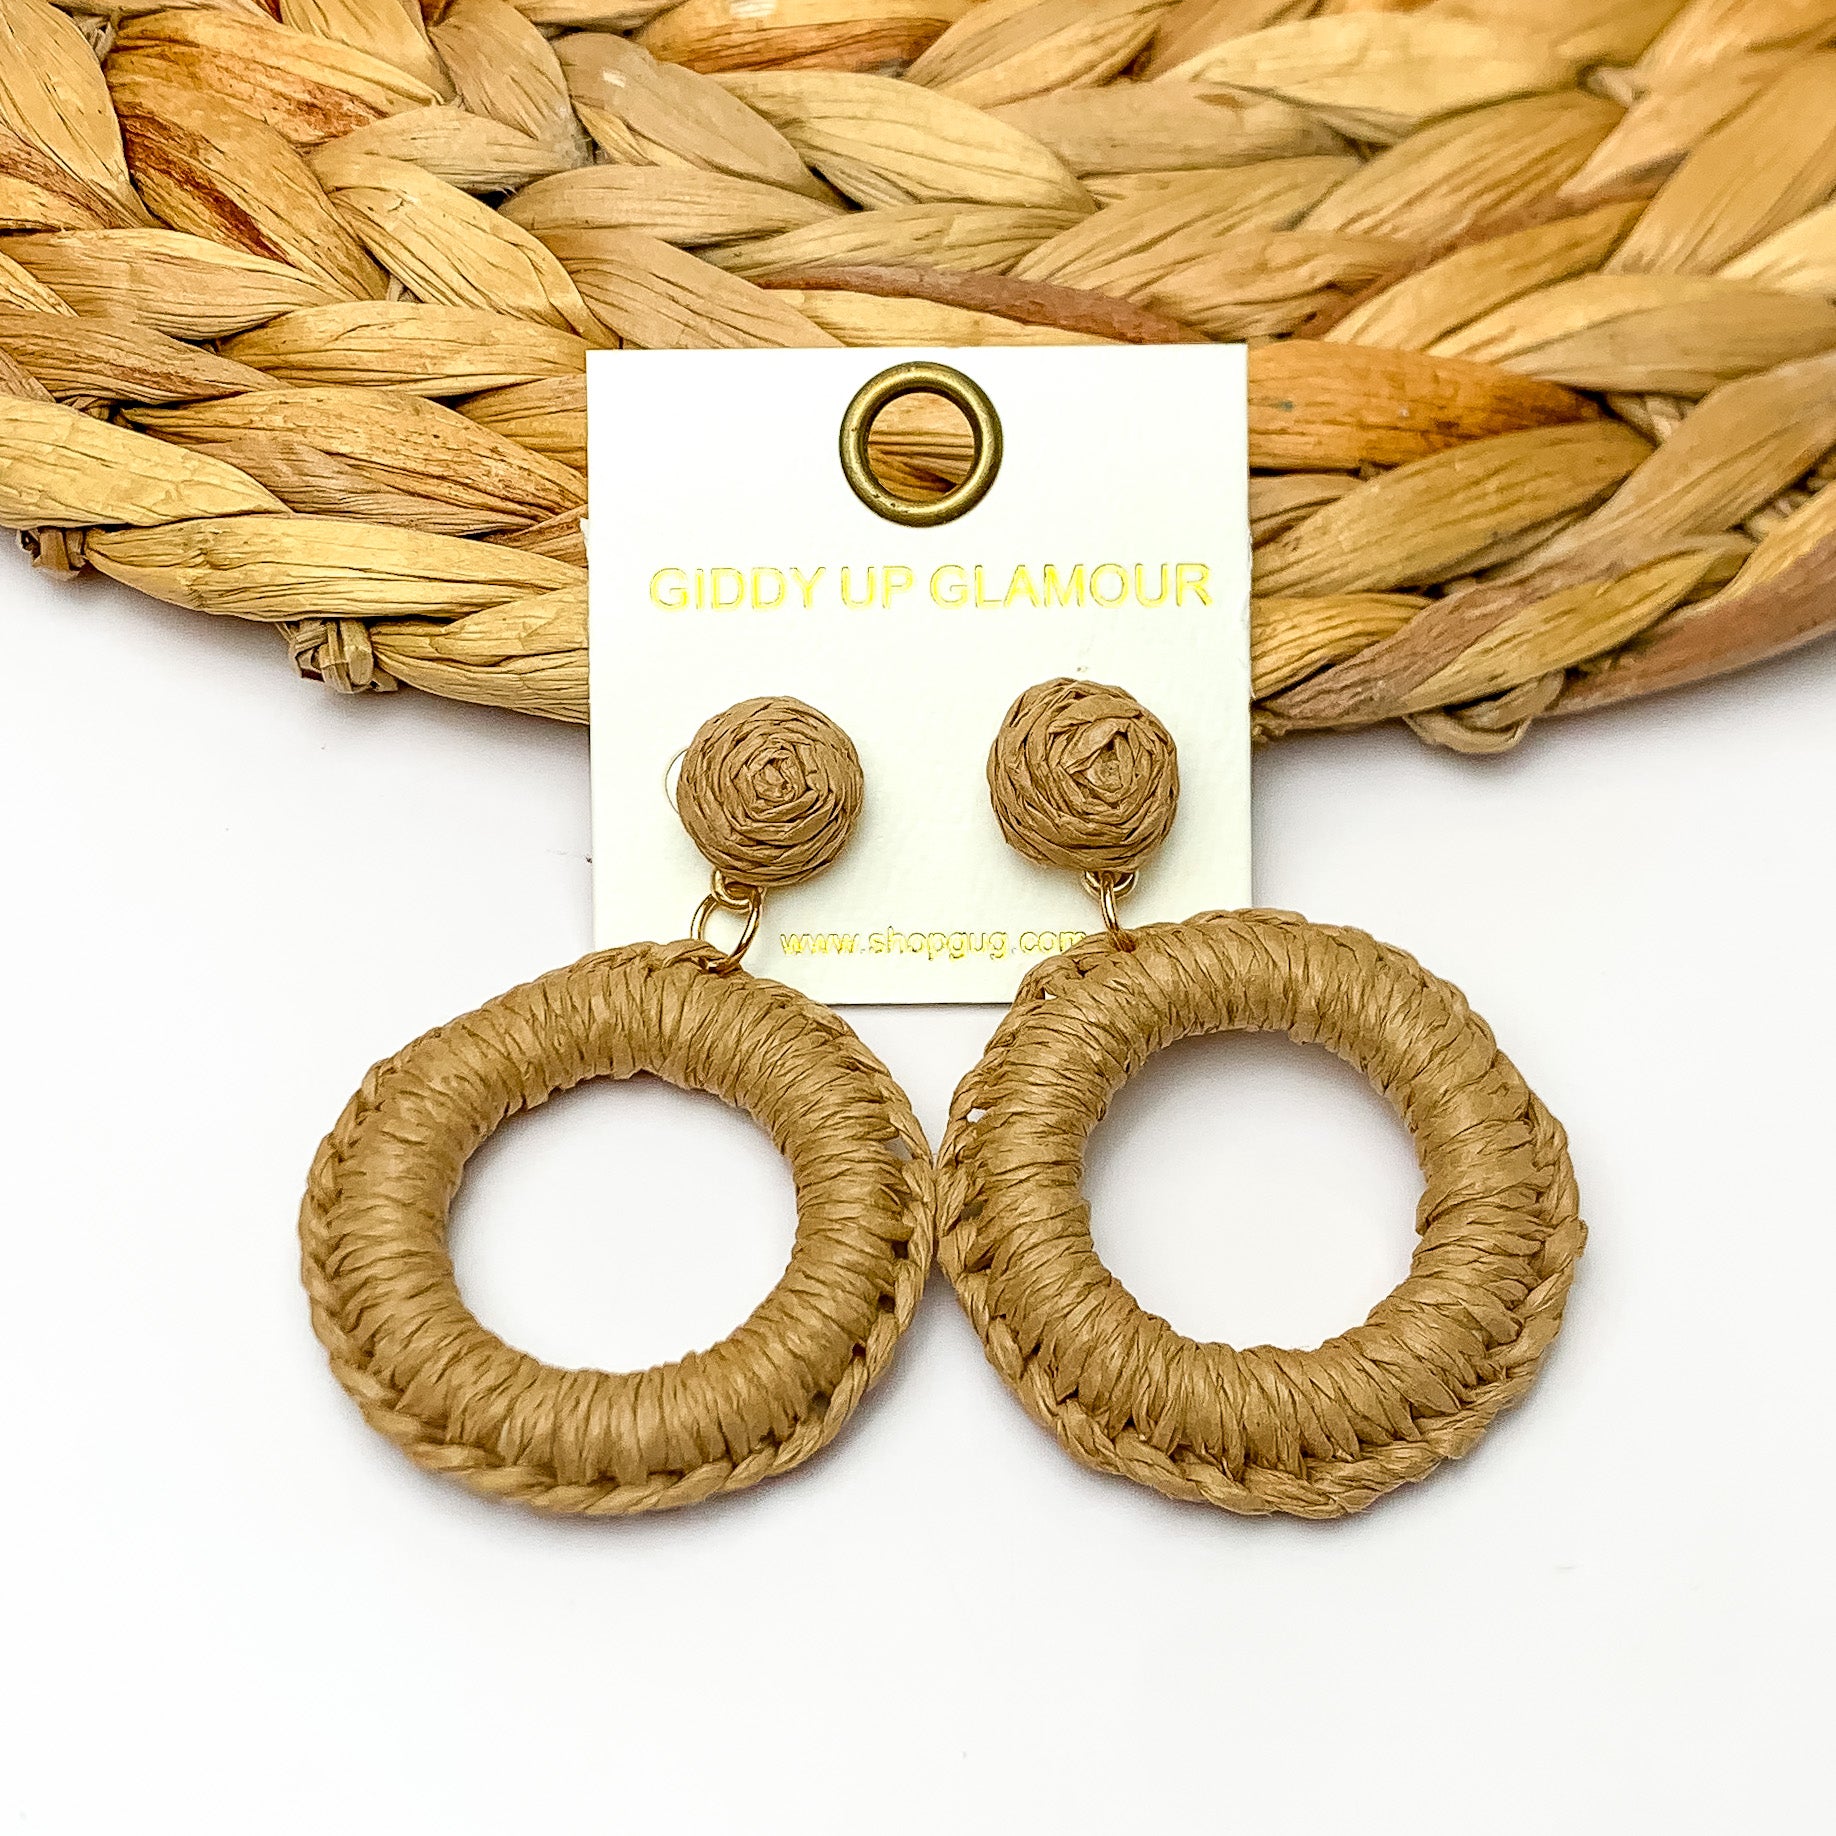 Beachside Café Raffia Wrapped Circle Earrings in Brown. Pictured on a white background with the top of the earrings laying on a brown circle decorative piece.